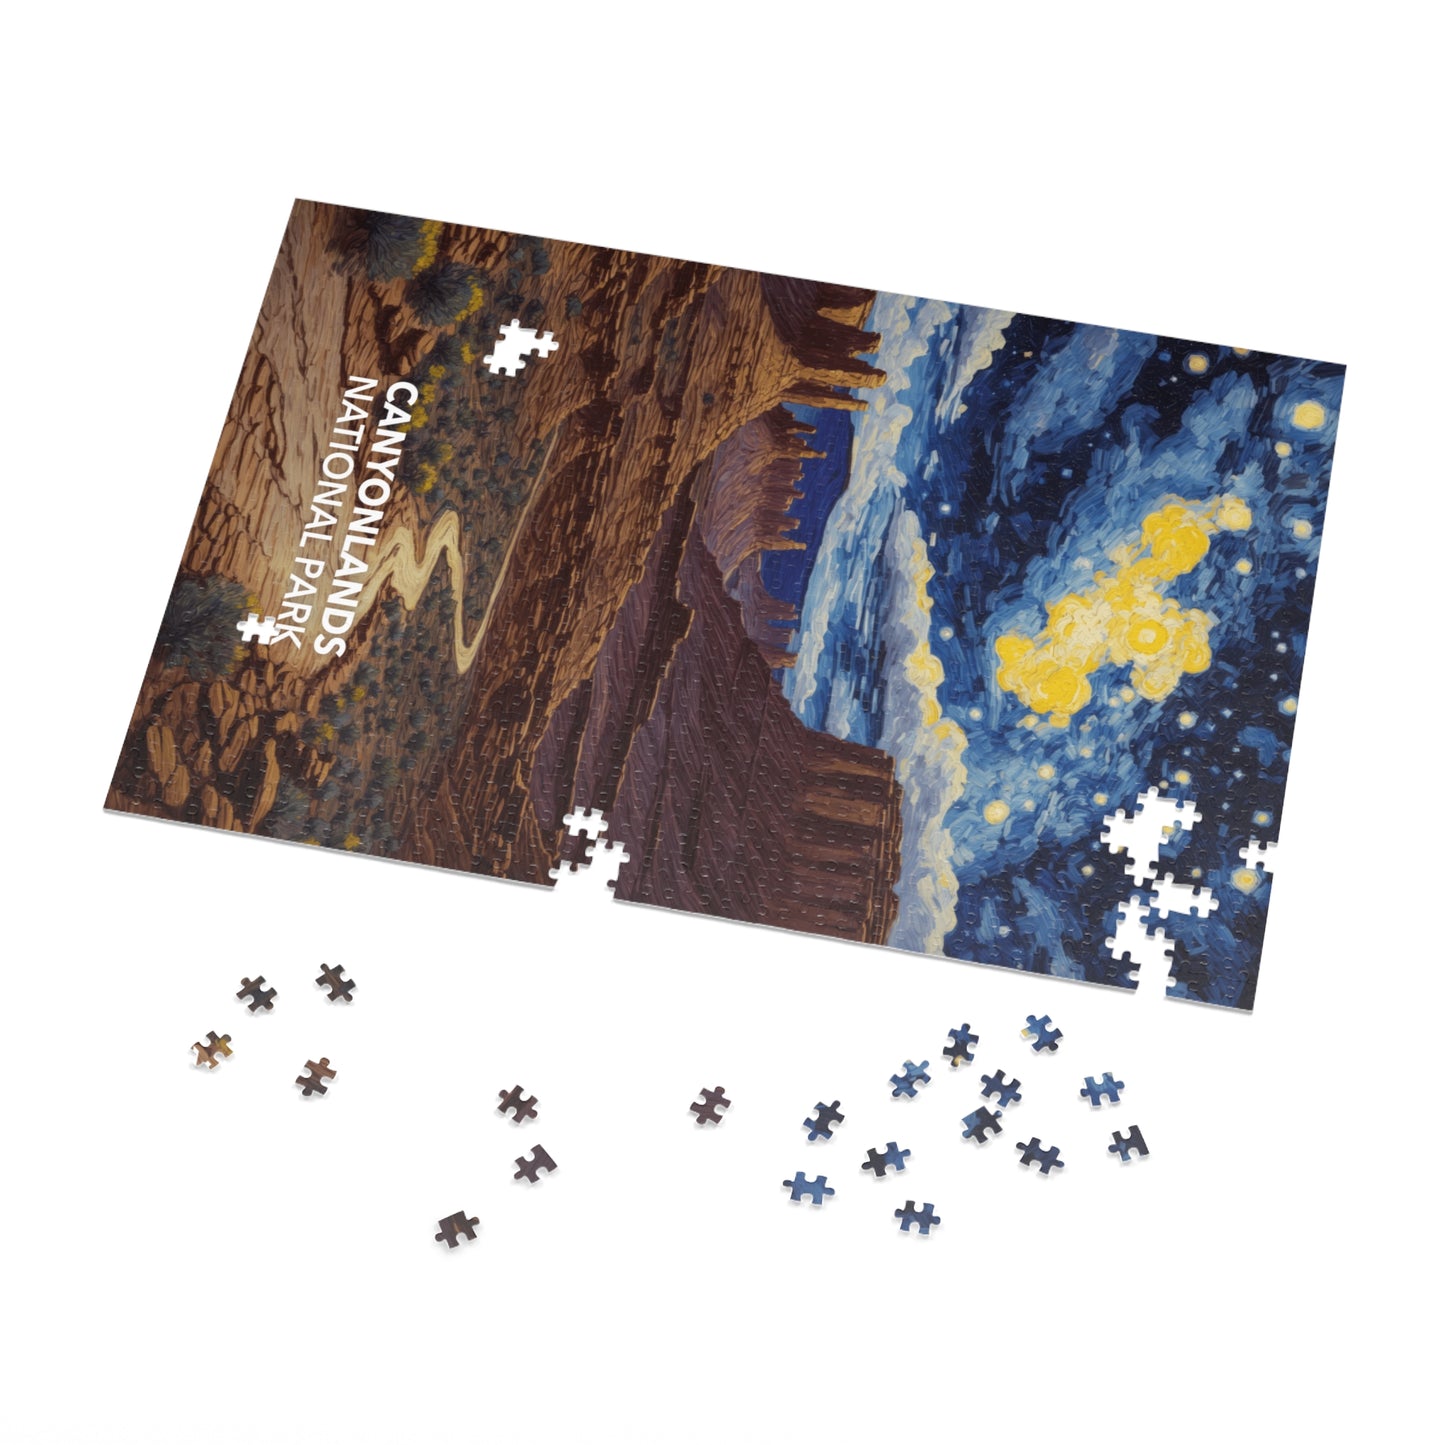 Canyonlands National Park Jigsaw Puzzle - The Starry Night